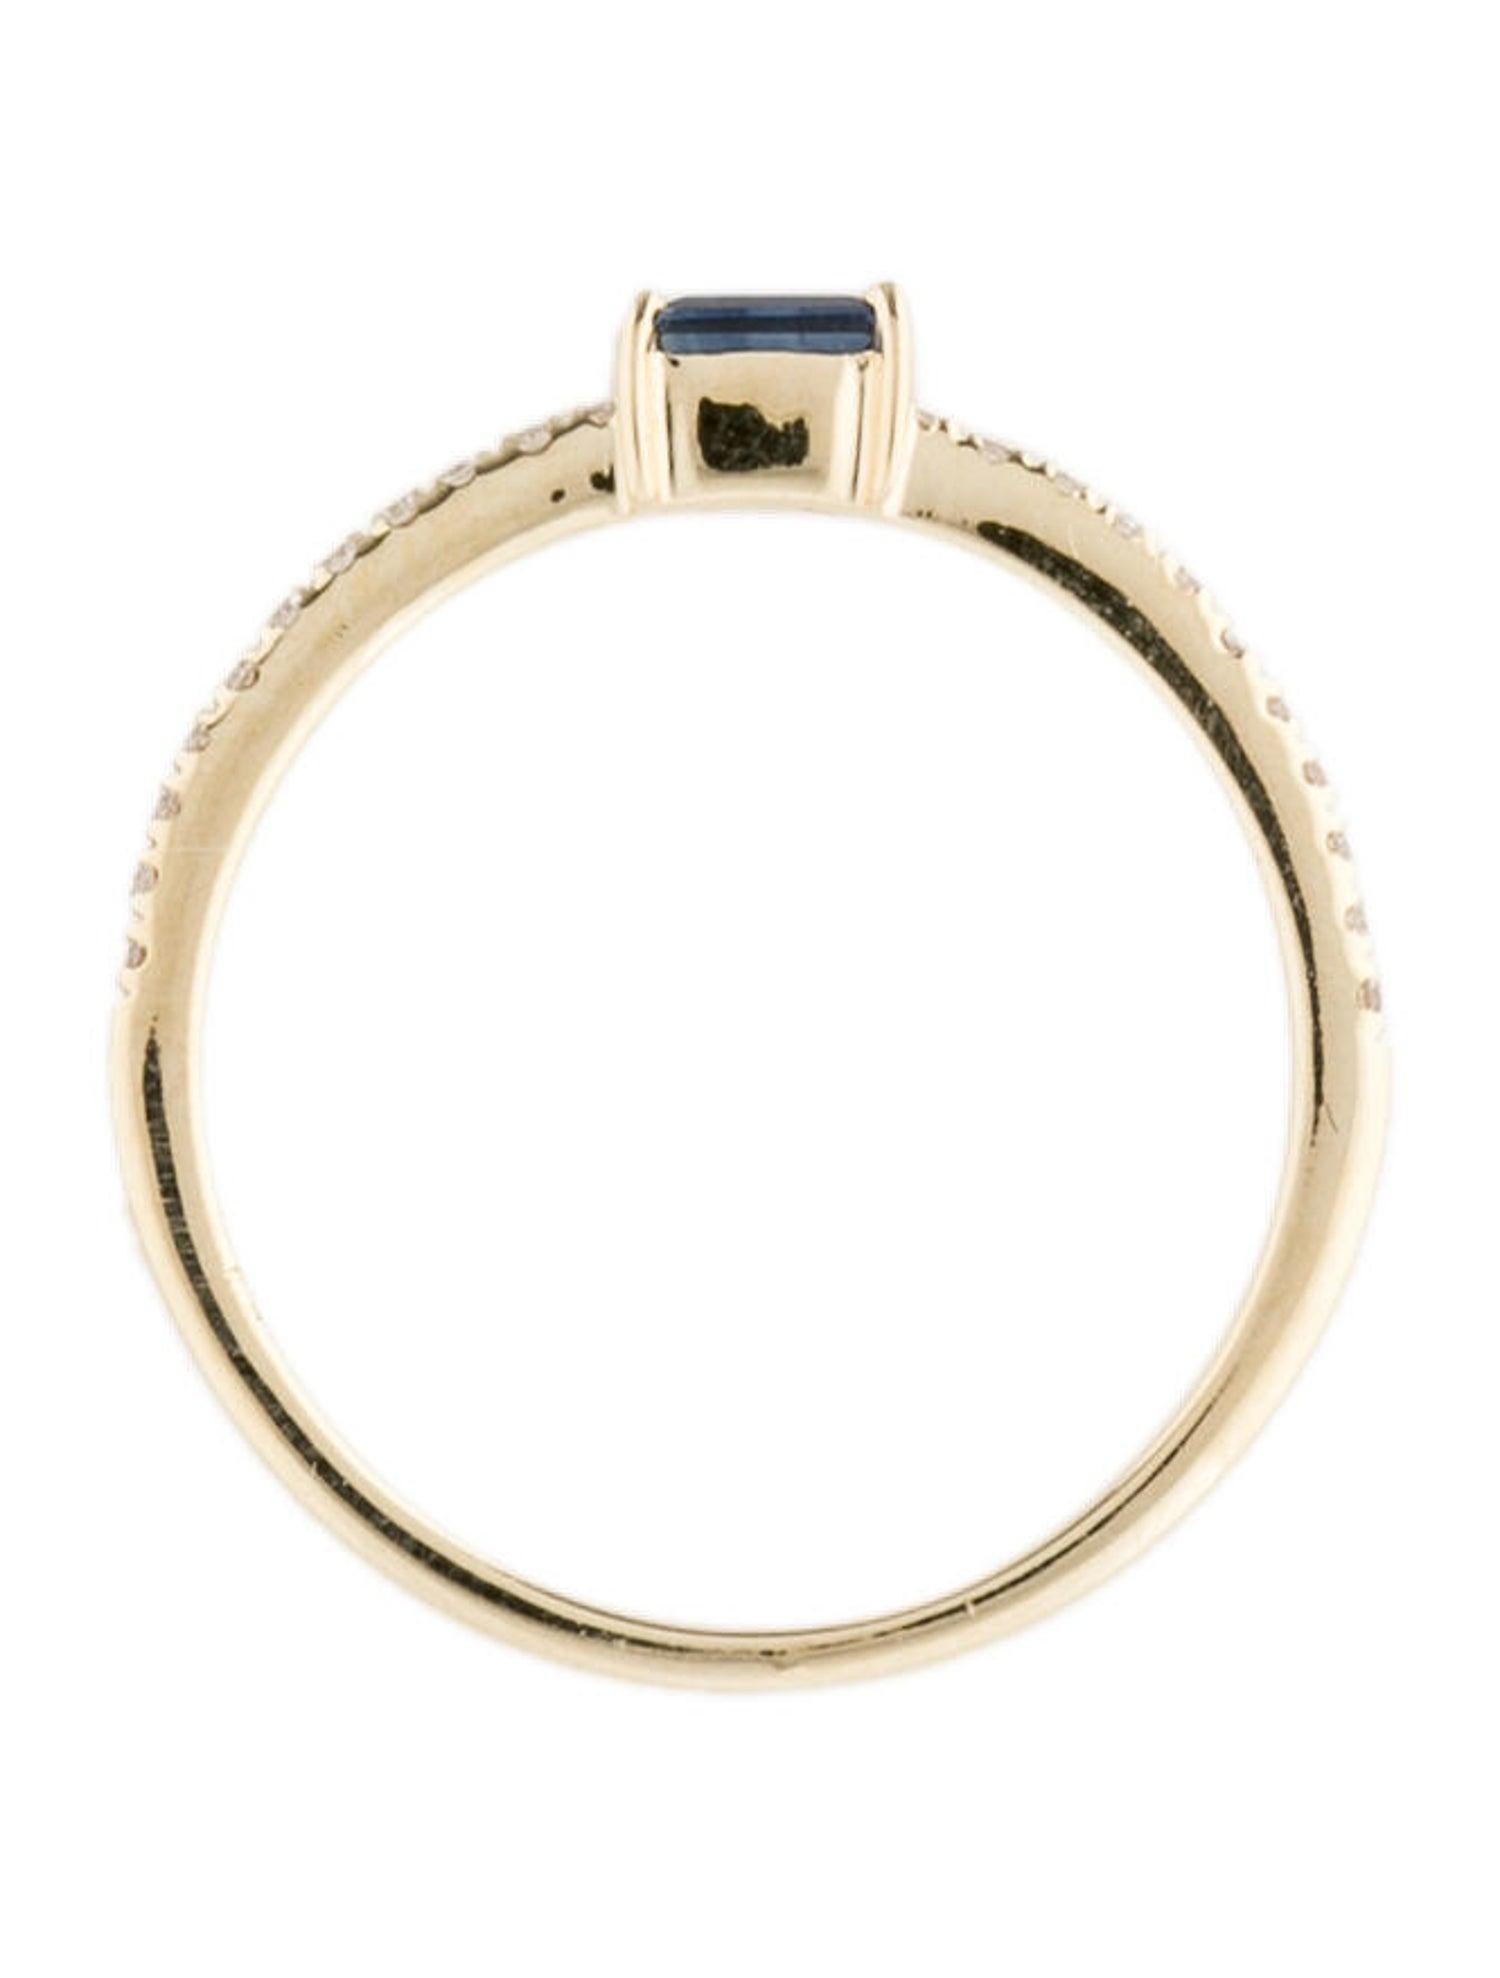 Charming and Elusive Design - This stackable ring features a 14k gold band, a baguette shaped gorgeous blue sapphire approximately 0.14 cts, and round diamonds approximately 0.09 cts, 
Measurements for ring size: The finger Size of the ring is 6.5